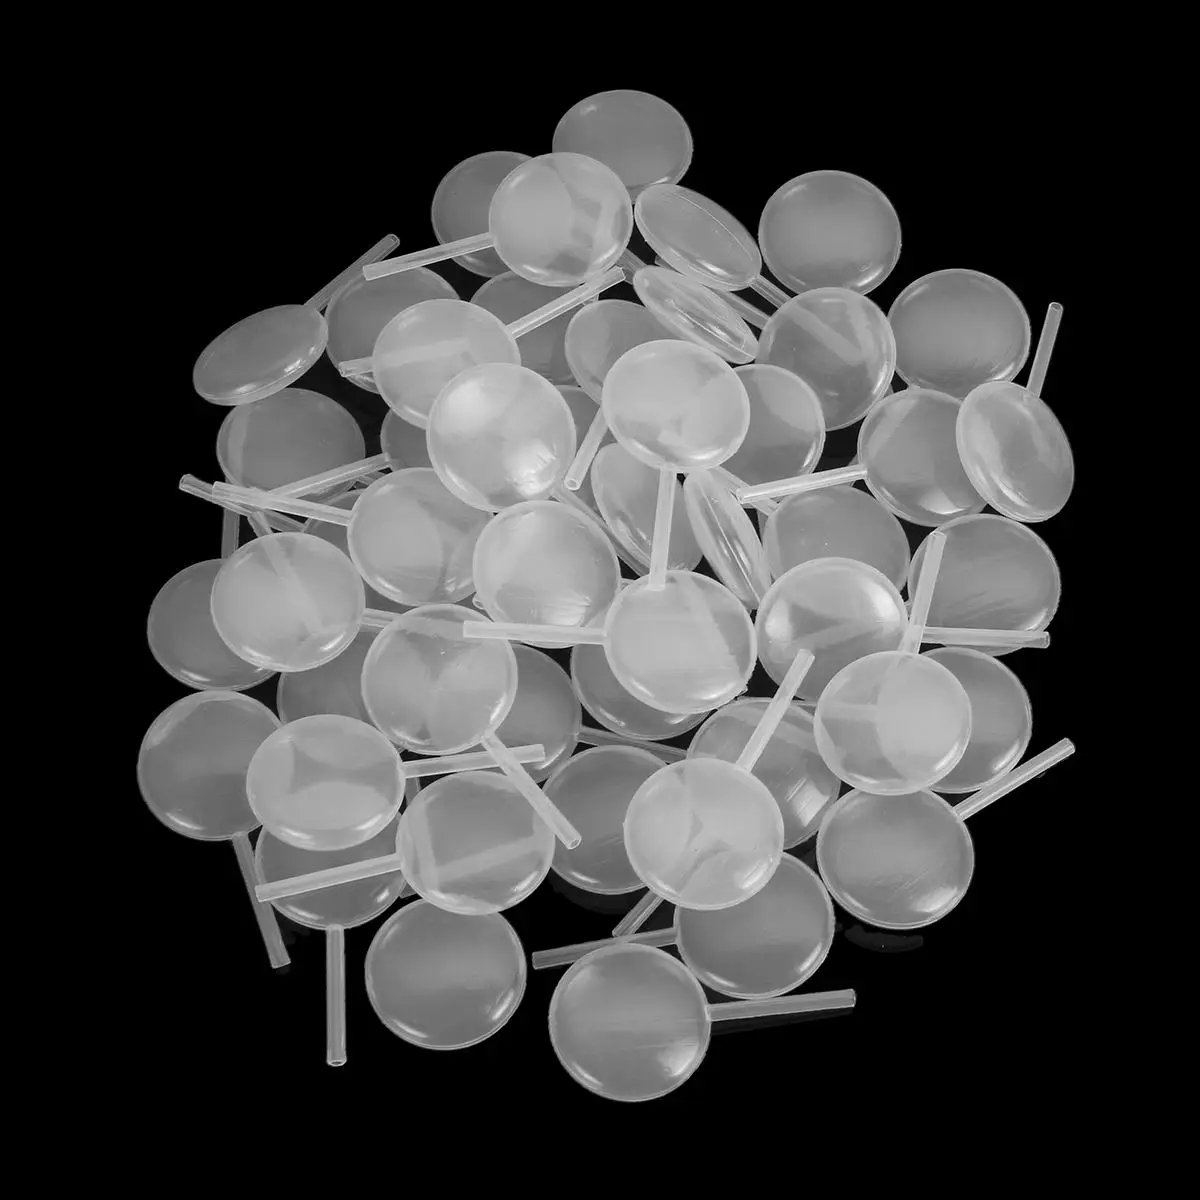 50pcs/Pack 4ml Clear Plastic Jam Dropper Straw Juice Squeezed Sauce Dropper Pipettes For Ice Cream Mini Cakes Baking Tool - Цвет: round